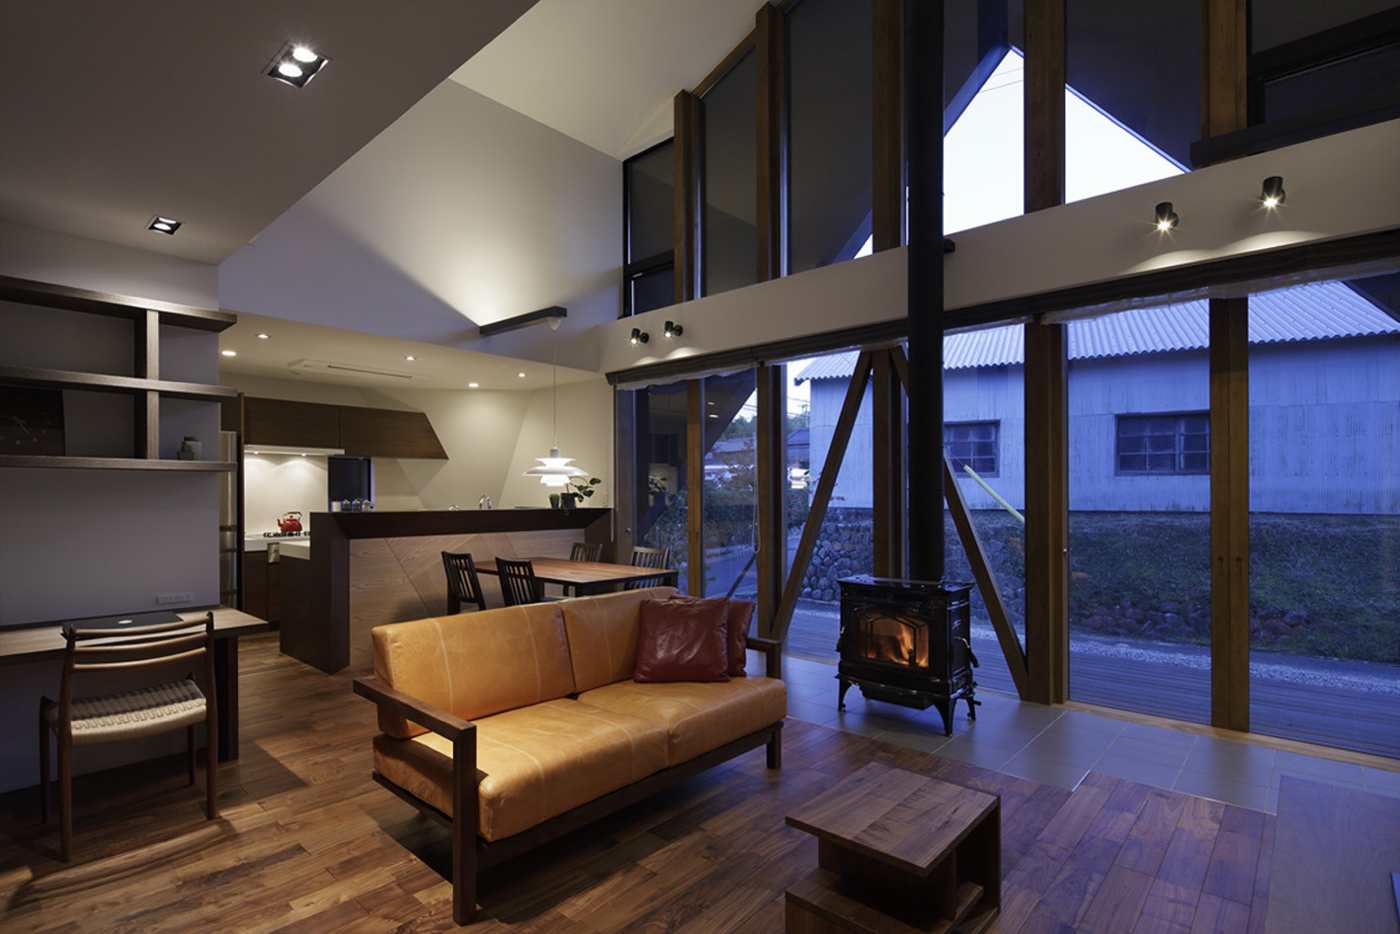 Roof tops and high ceilings in residential indirect lighting create comfortable ambience